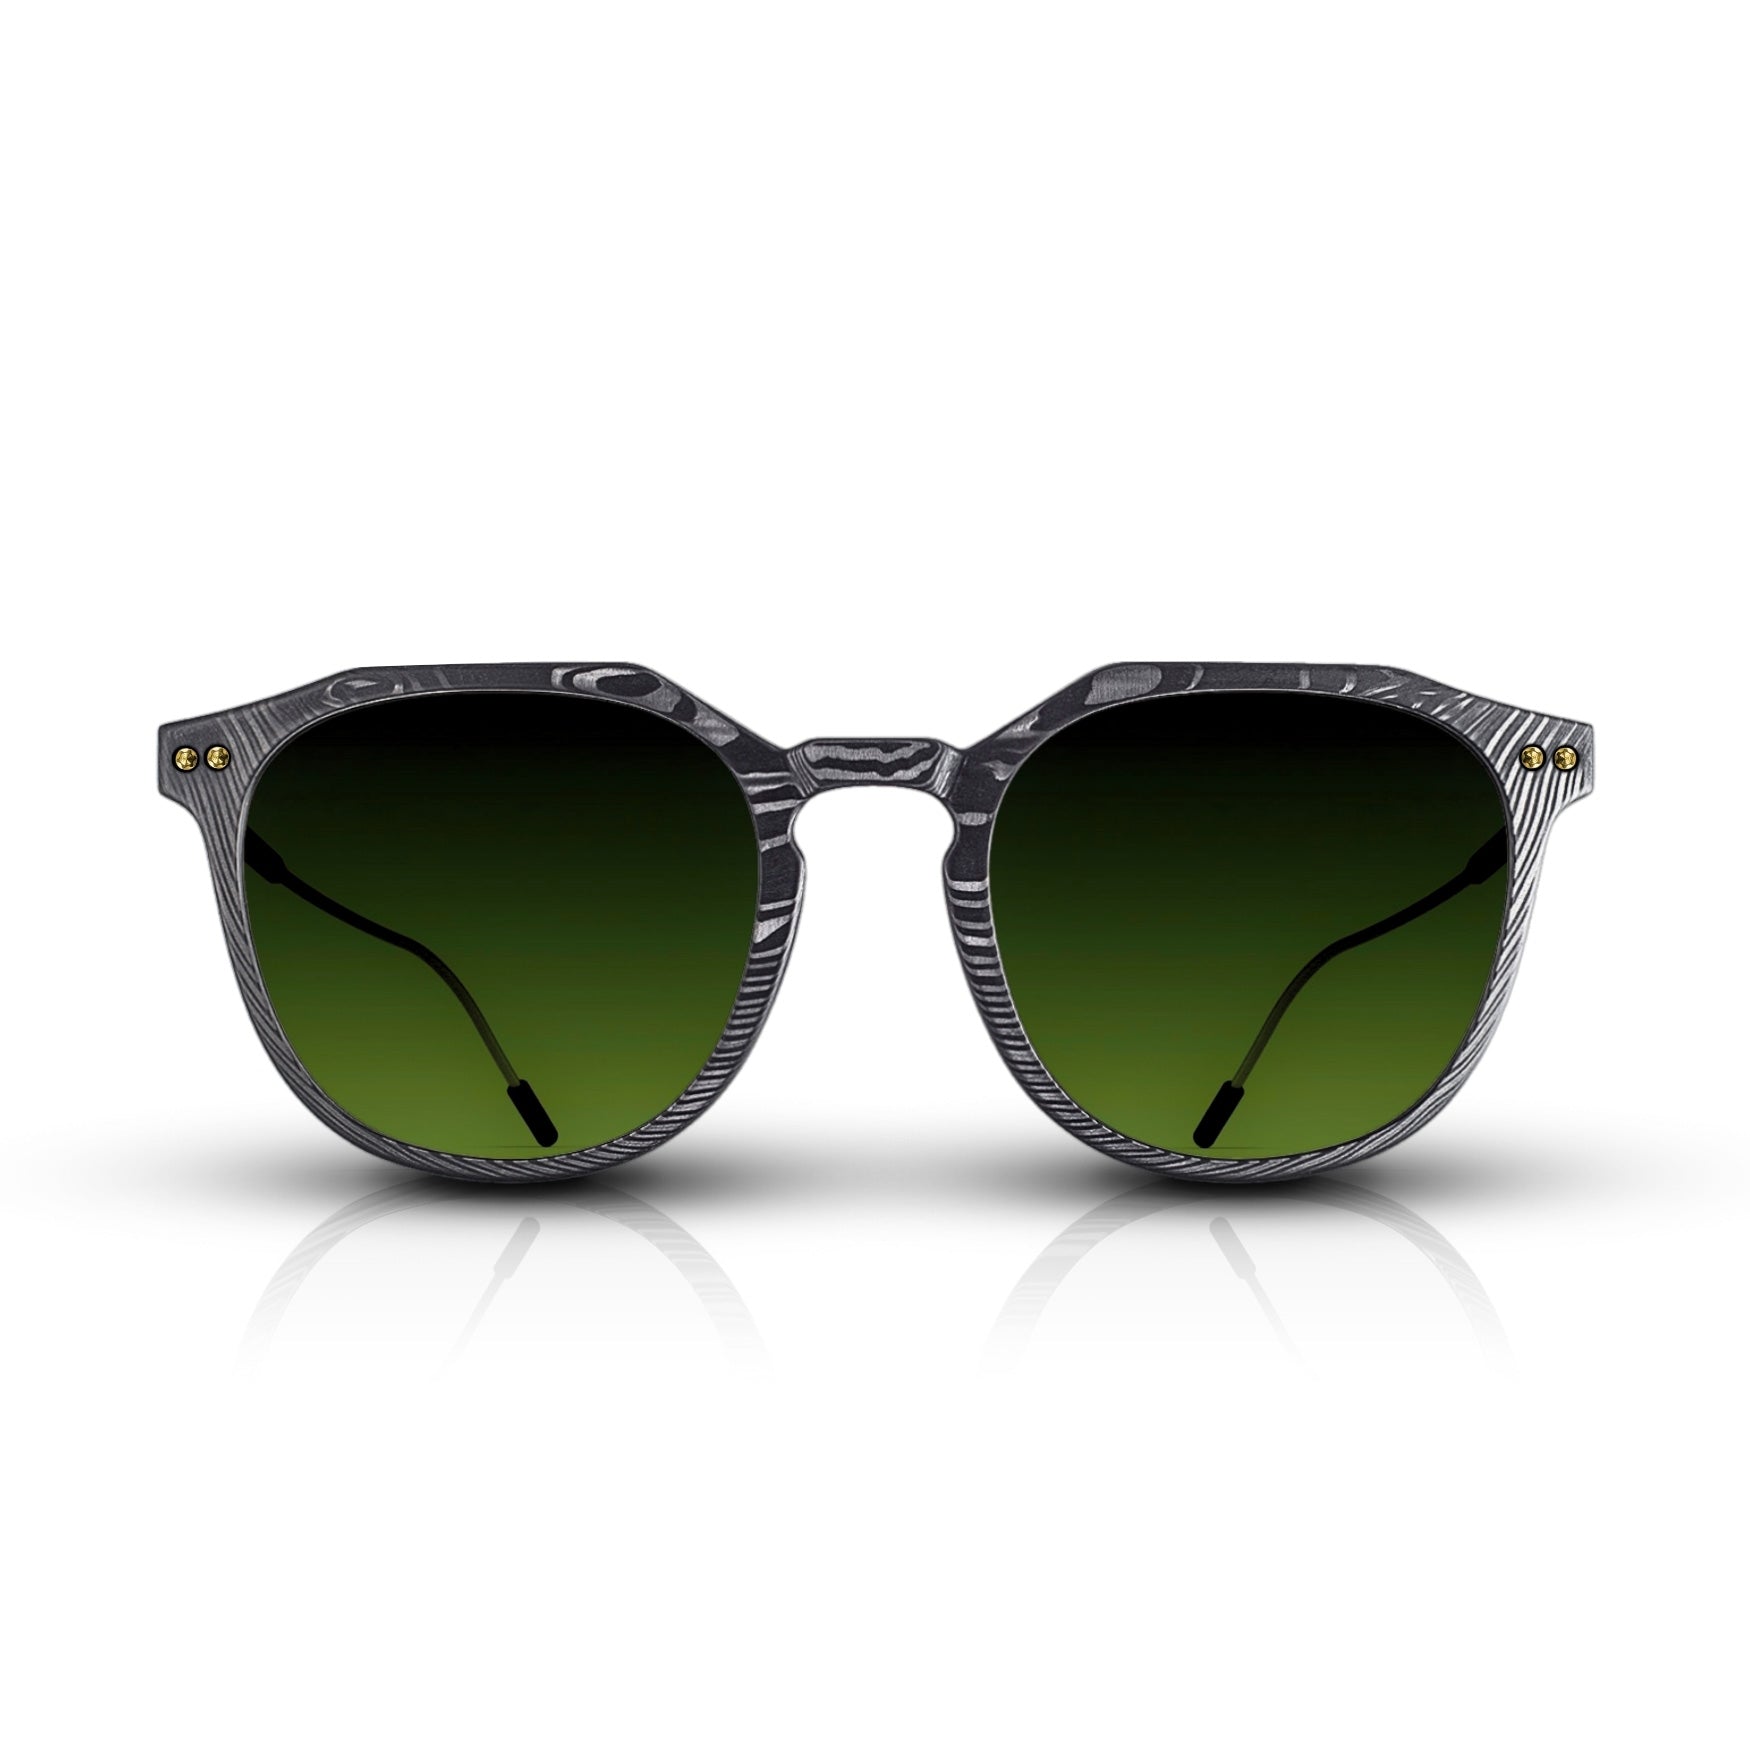 Front of the latest Roveri Eyewear CLM7 Brick Collection, pantos inspired sunglasses for men in UDCT® Machined Carbon Fiber, with dark green gradient lenses and gold plated Beta-Titanium frame, handmade in Italy.